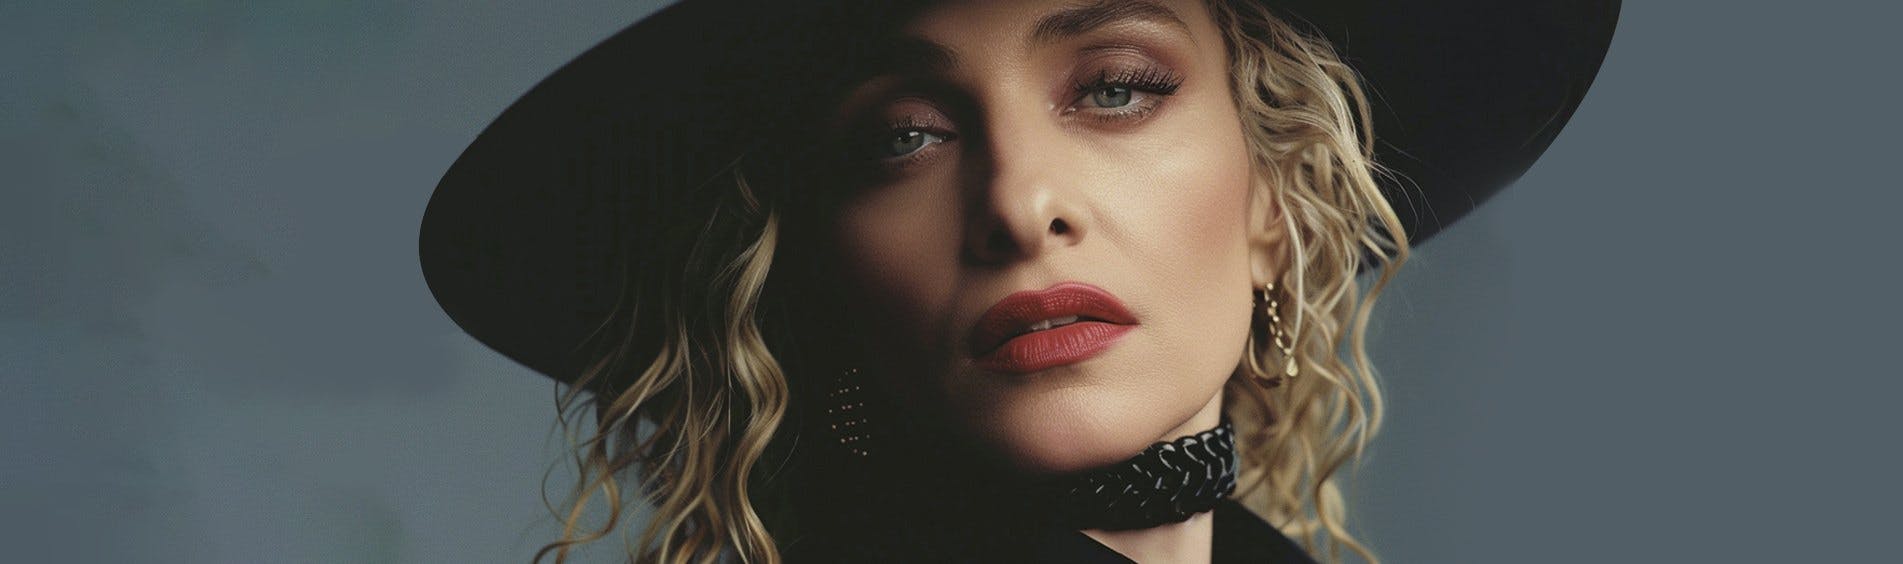 Cover Image for Madonna Recalls The Tragic Moment Of Losing Her Mother In A Heartfelt Post